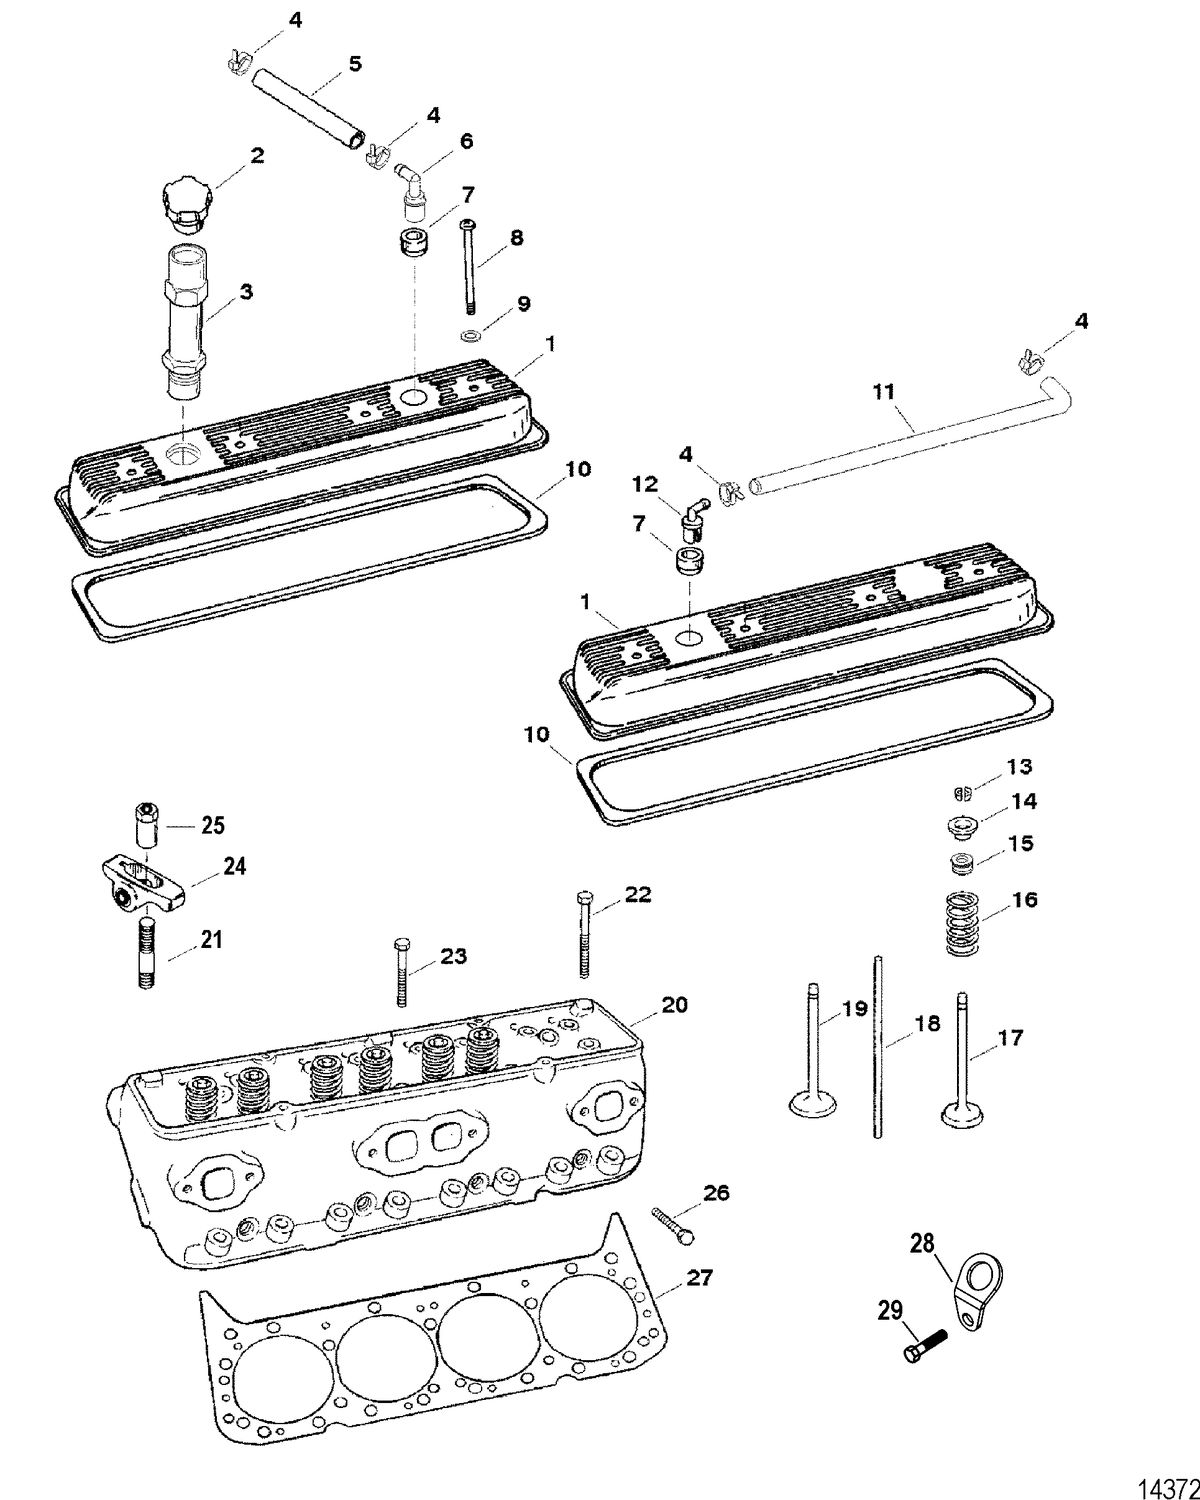 RACE STERNDRIVE SCORPION 377 STERNDRIVE Cylinder Head And Rocker Covers